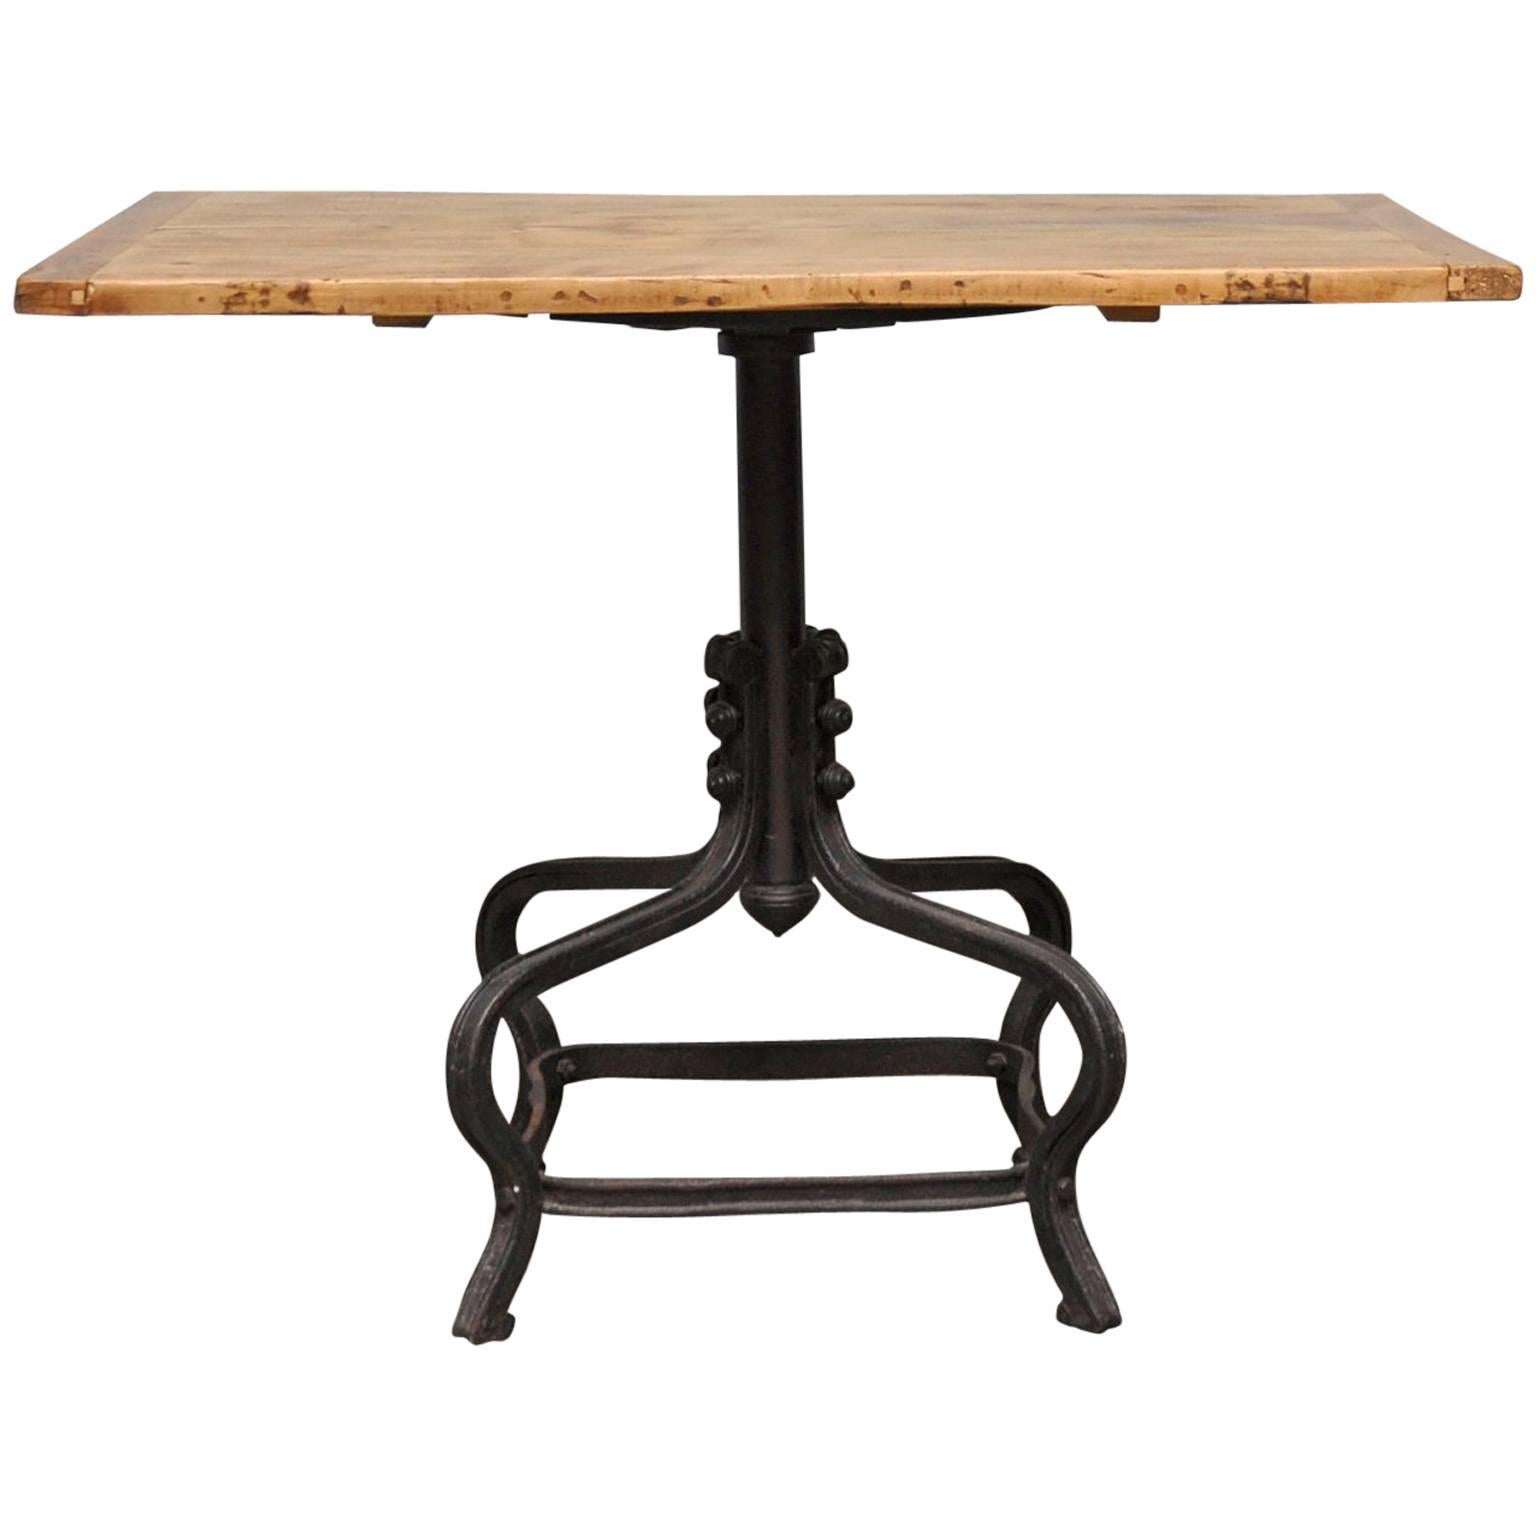 Small Table on a Cast Iron Foot, circa 1925